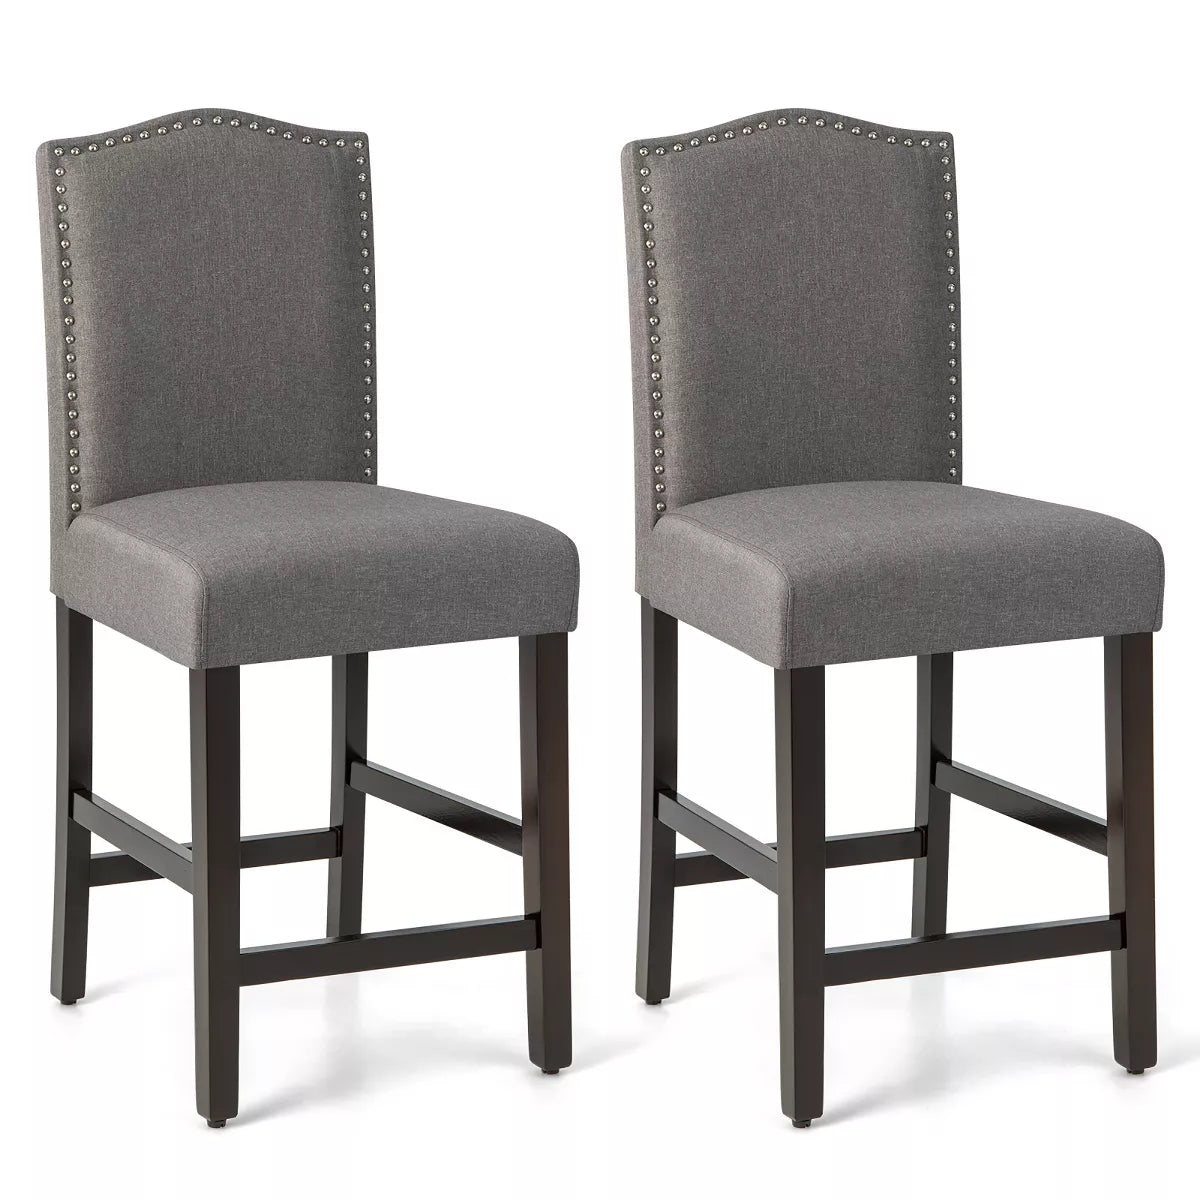 Set of 2 Fabric Barstools Nail Head Trim Counter Height Dining Side Chairs Grey/Beige